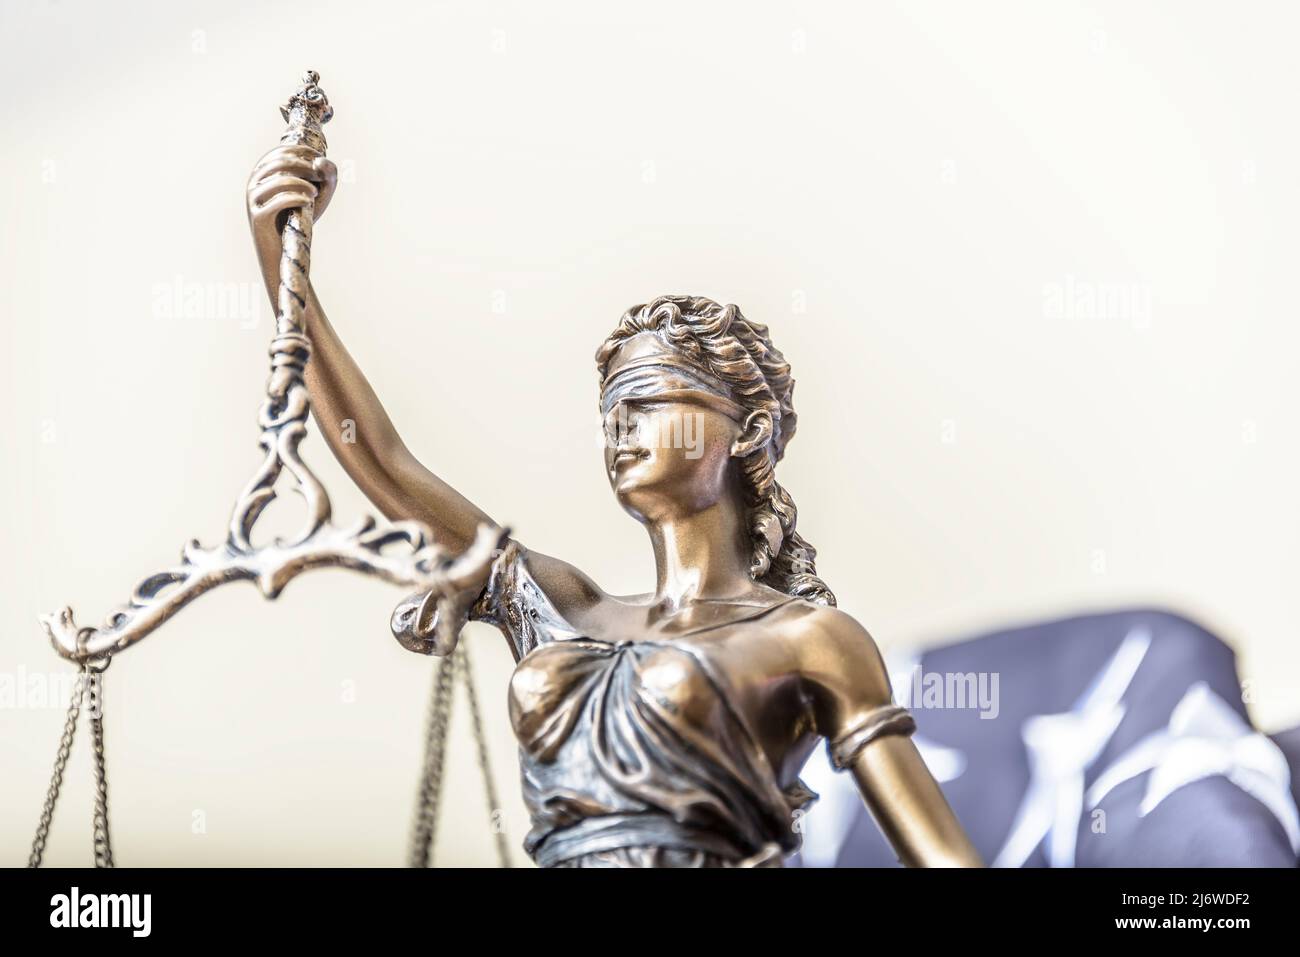 The statue of justice Themis or Iustitia, the goddess of justice blindfolded against a flag of the United States of America, as a legal concept. Stock Photo